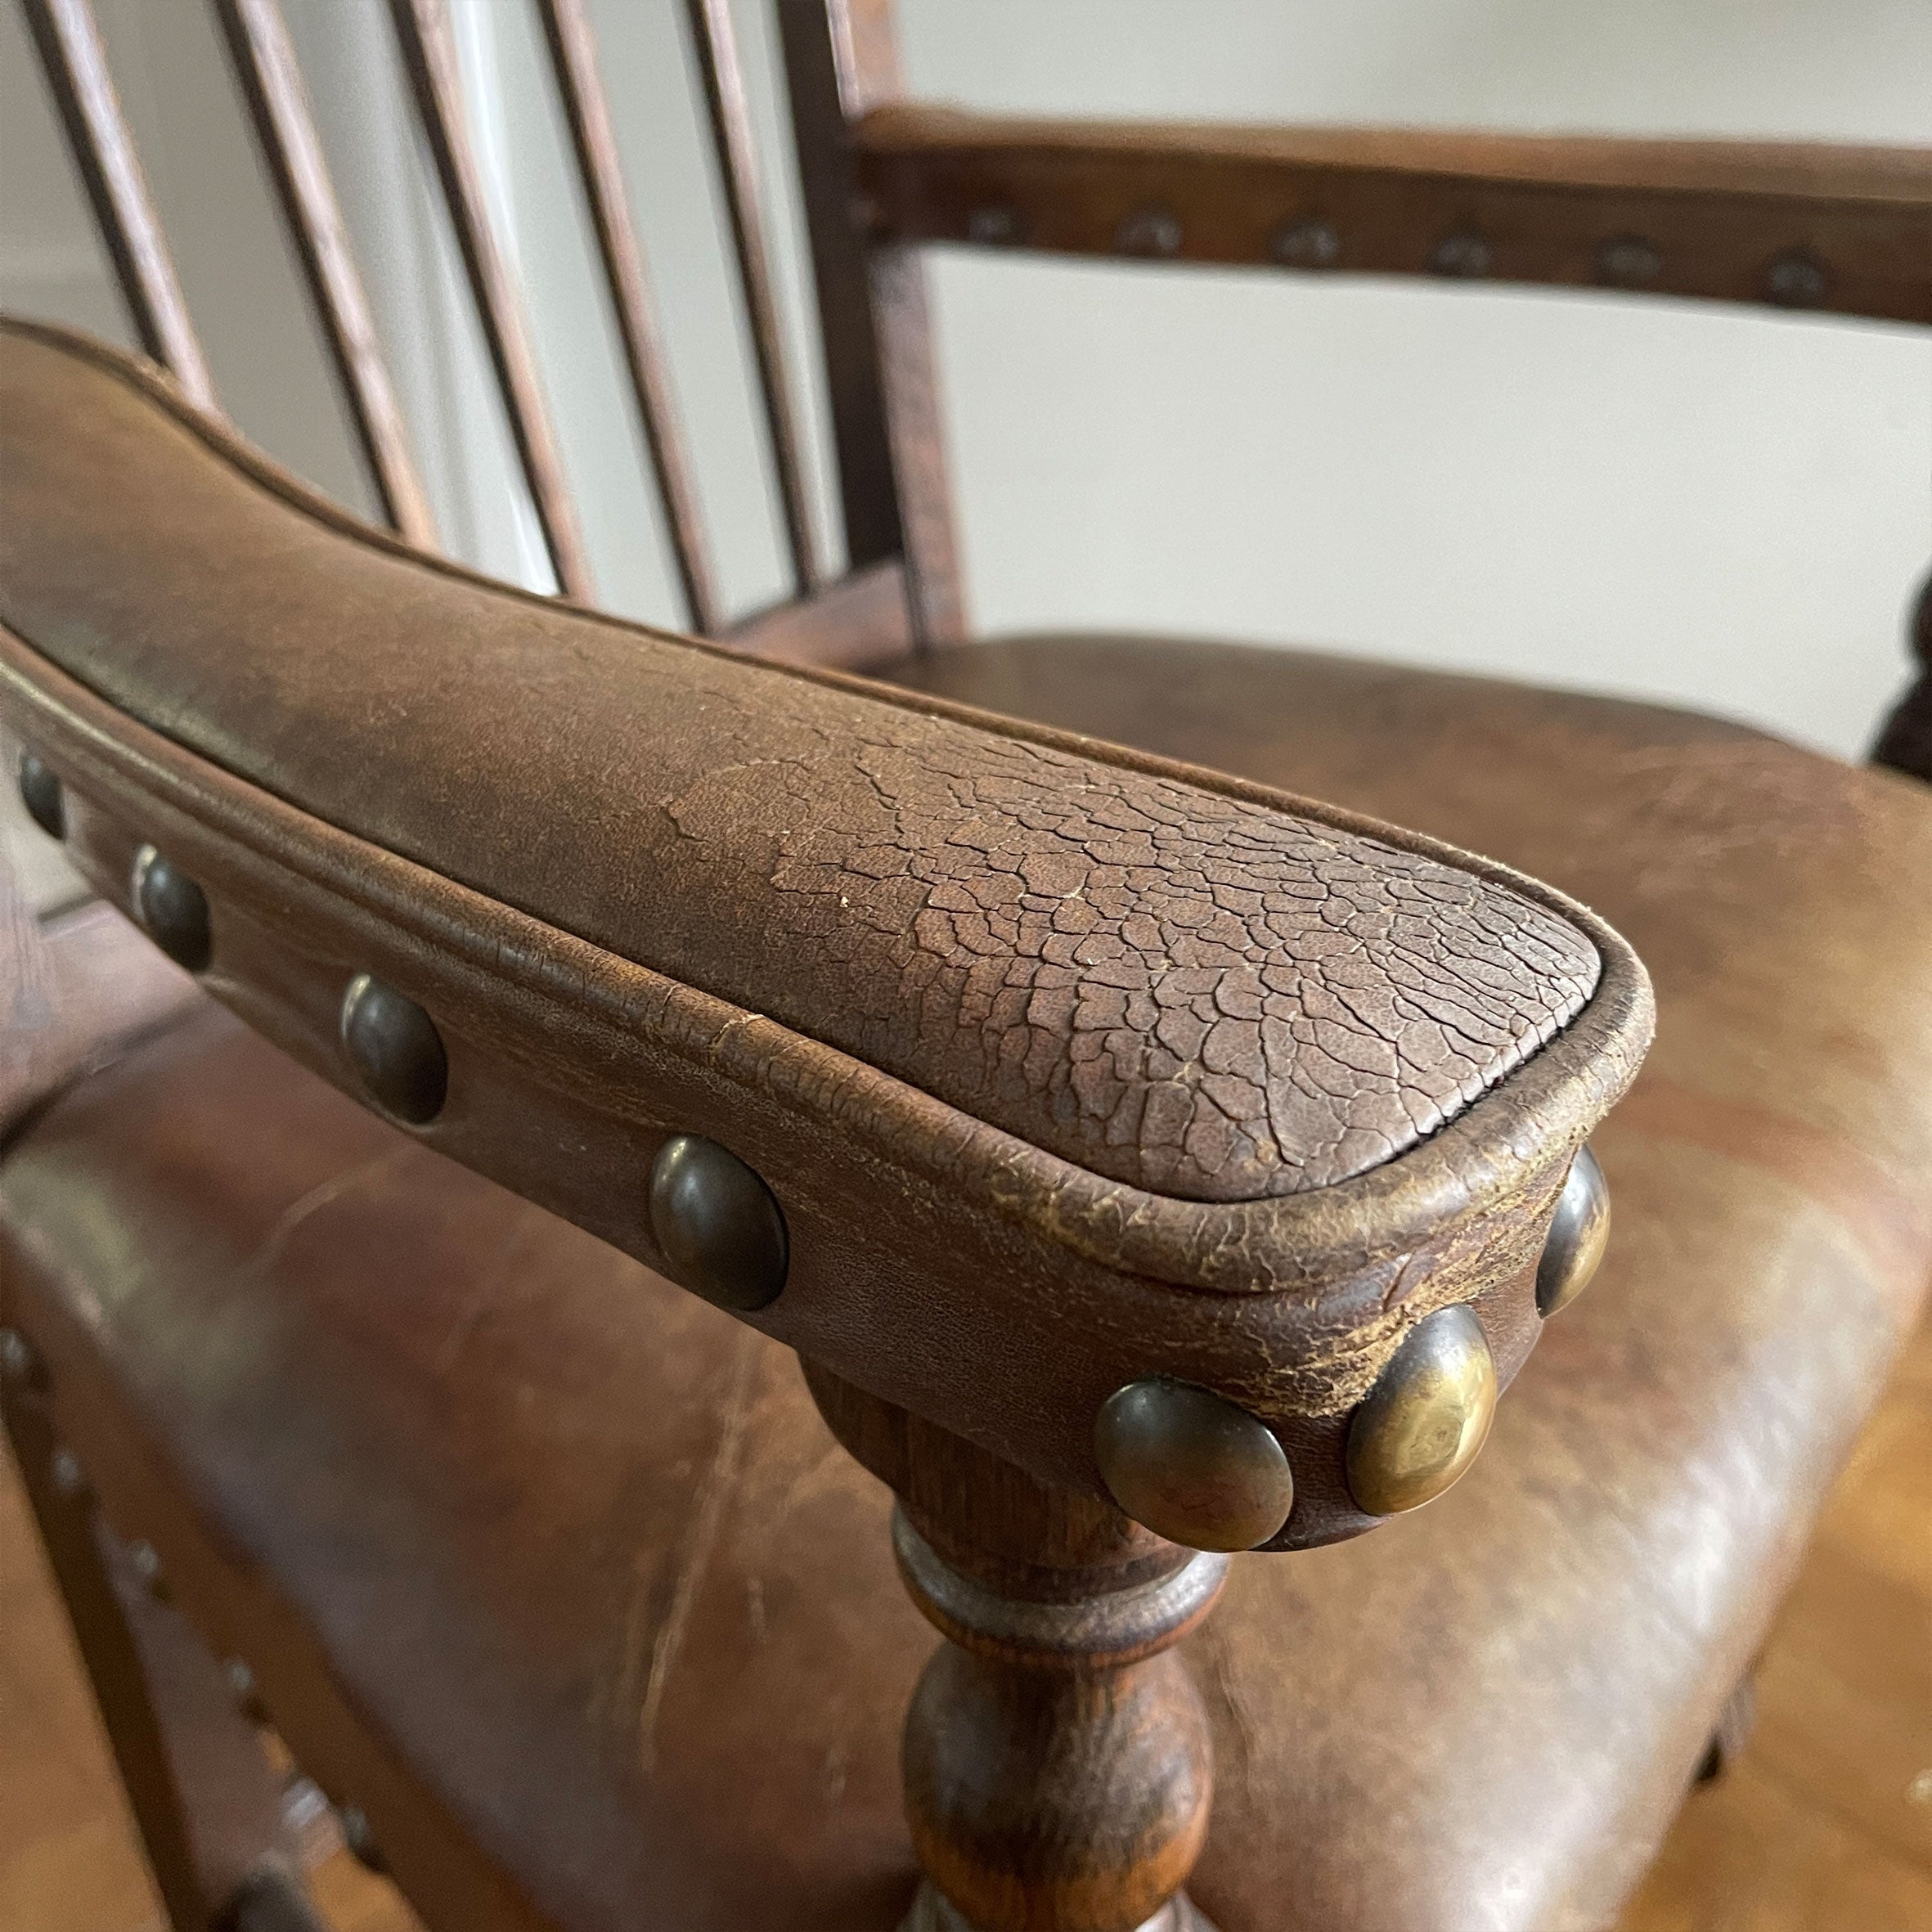 A super solid oak Arts and Crafts styled Carver Chair by the master furniture maker Rupert Griffiths. The style is known as 'Monastic' with this being a Swiss Stick back. The chair has its original leather seat and arms with big old brass studs holding it all in place. The frame is of oak and jointed with oak pegs - SHOP NOW - www.intovintage.co.uk